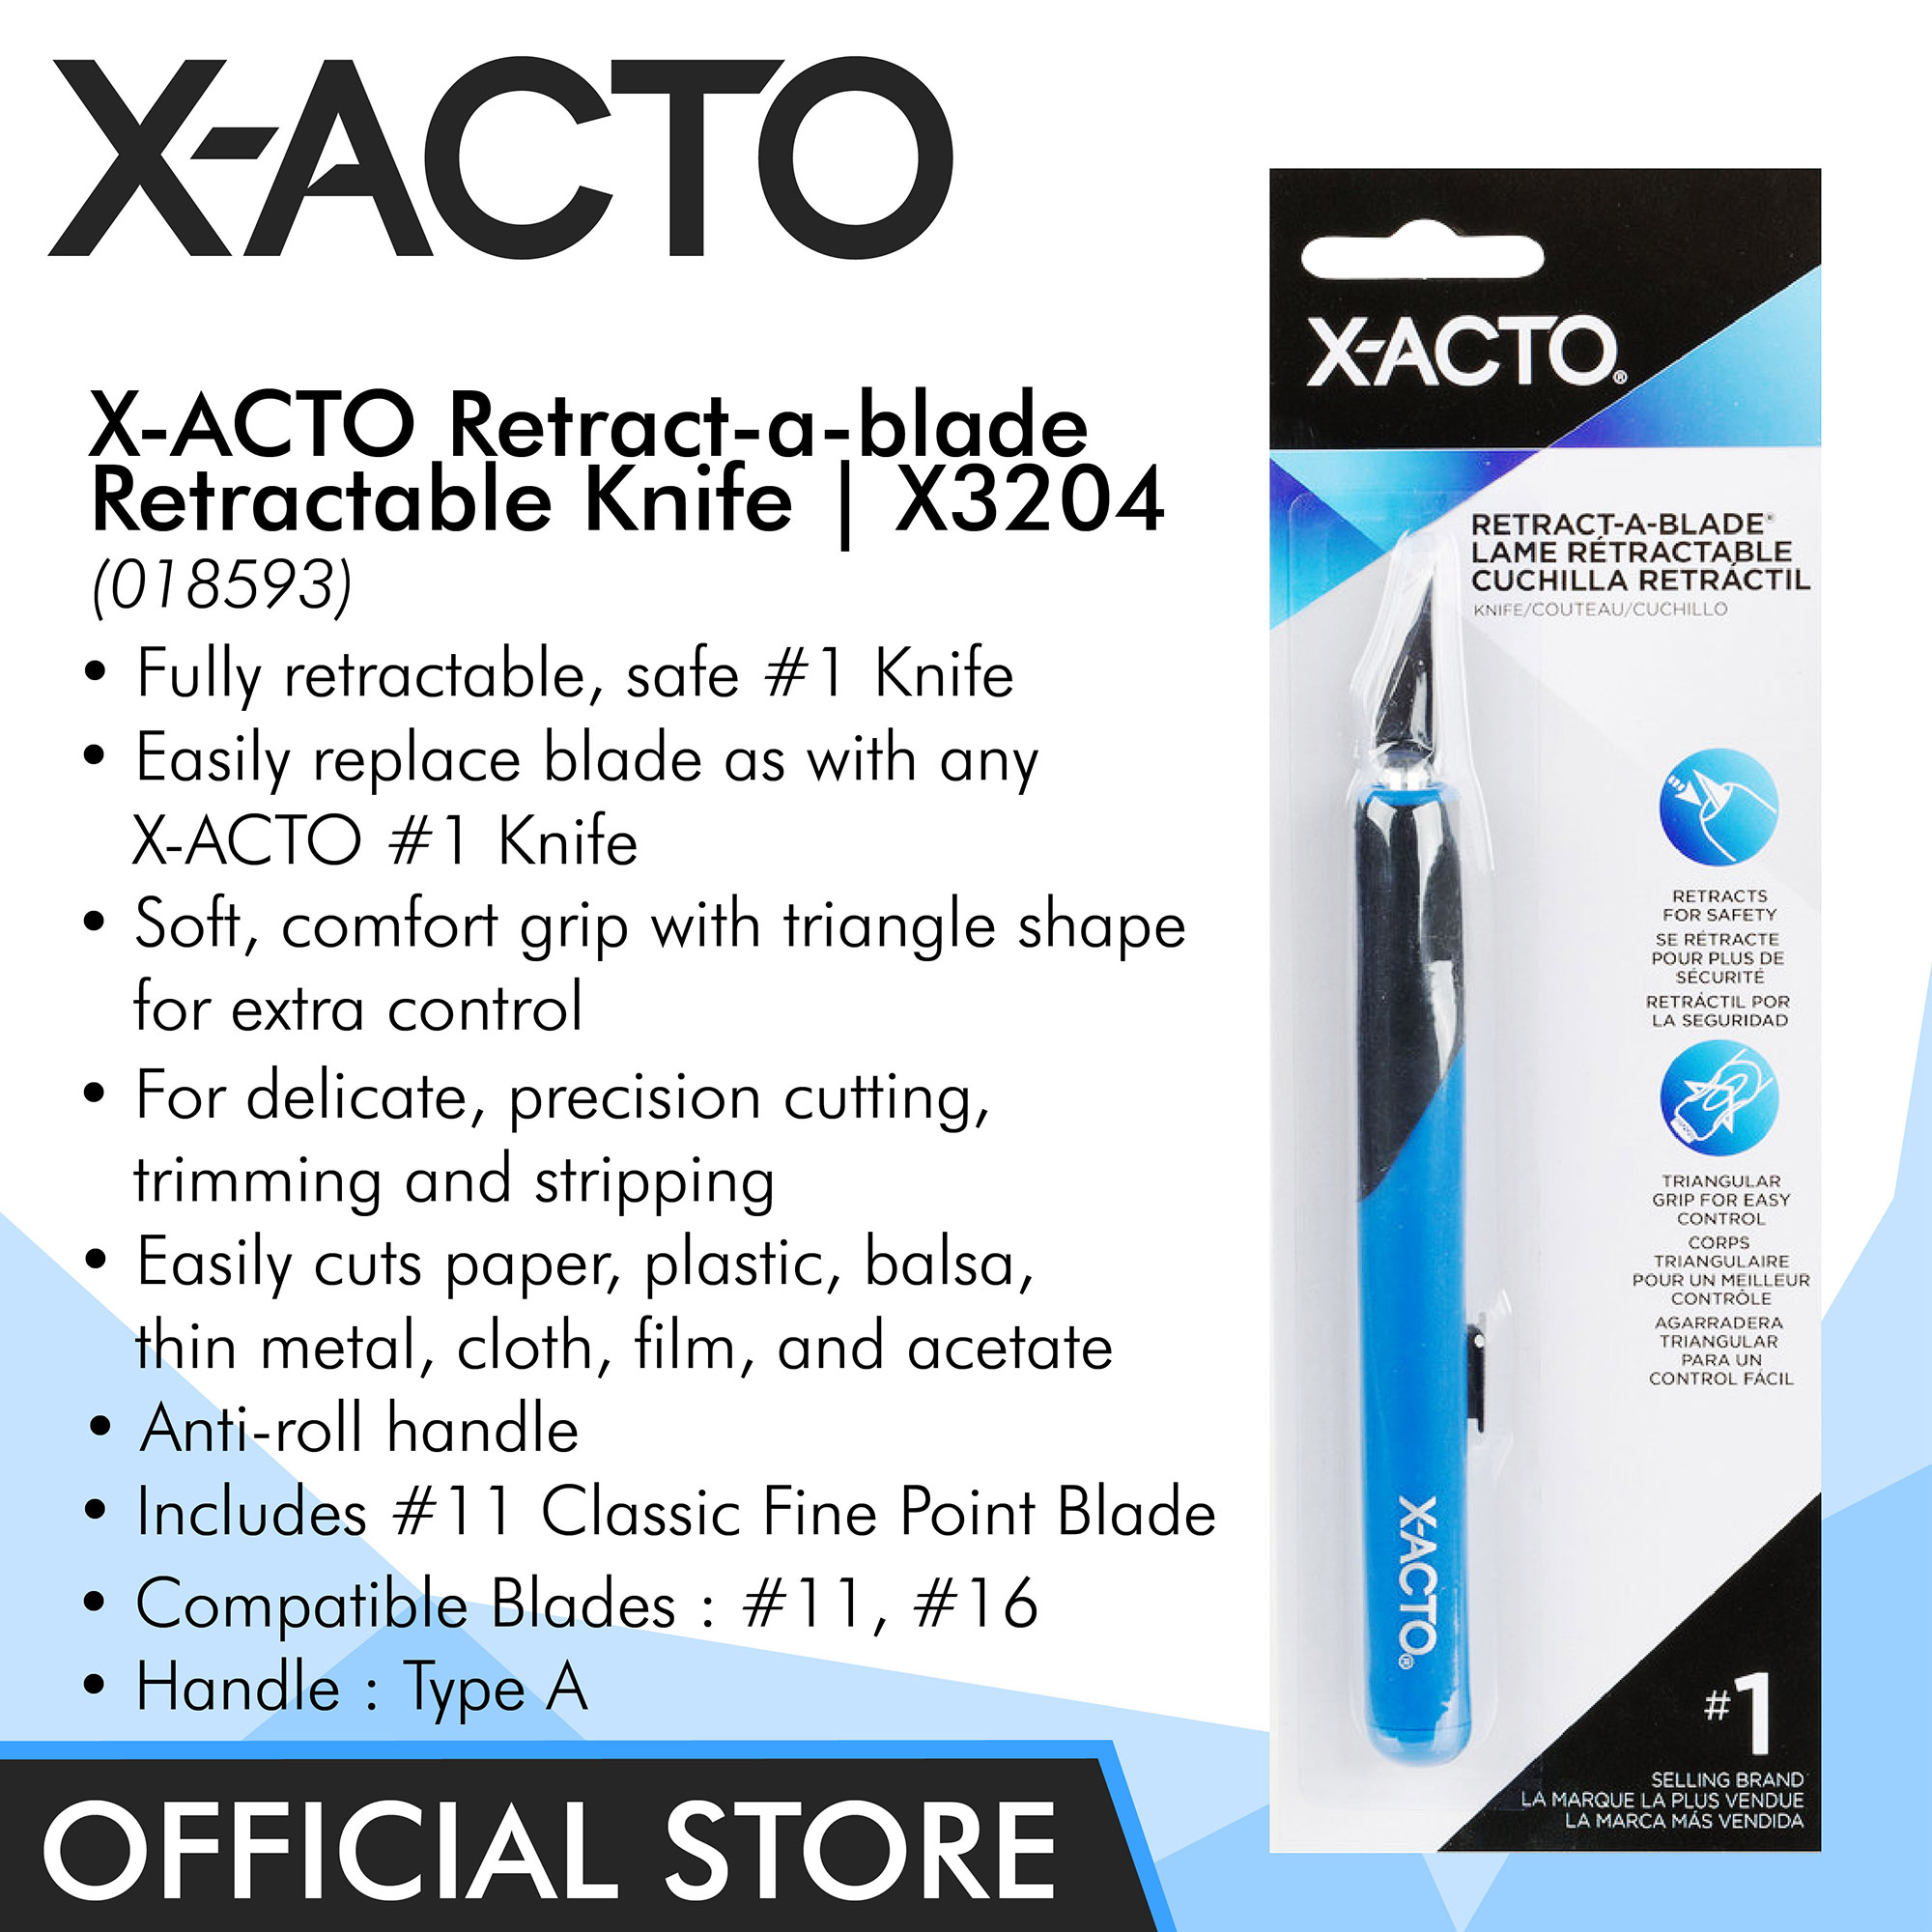 X-acto #18 Heavyweight Wood Chiseling Blade Carded (5) X218